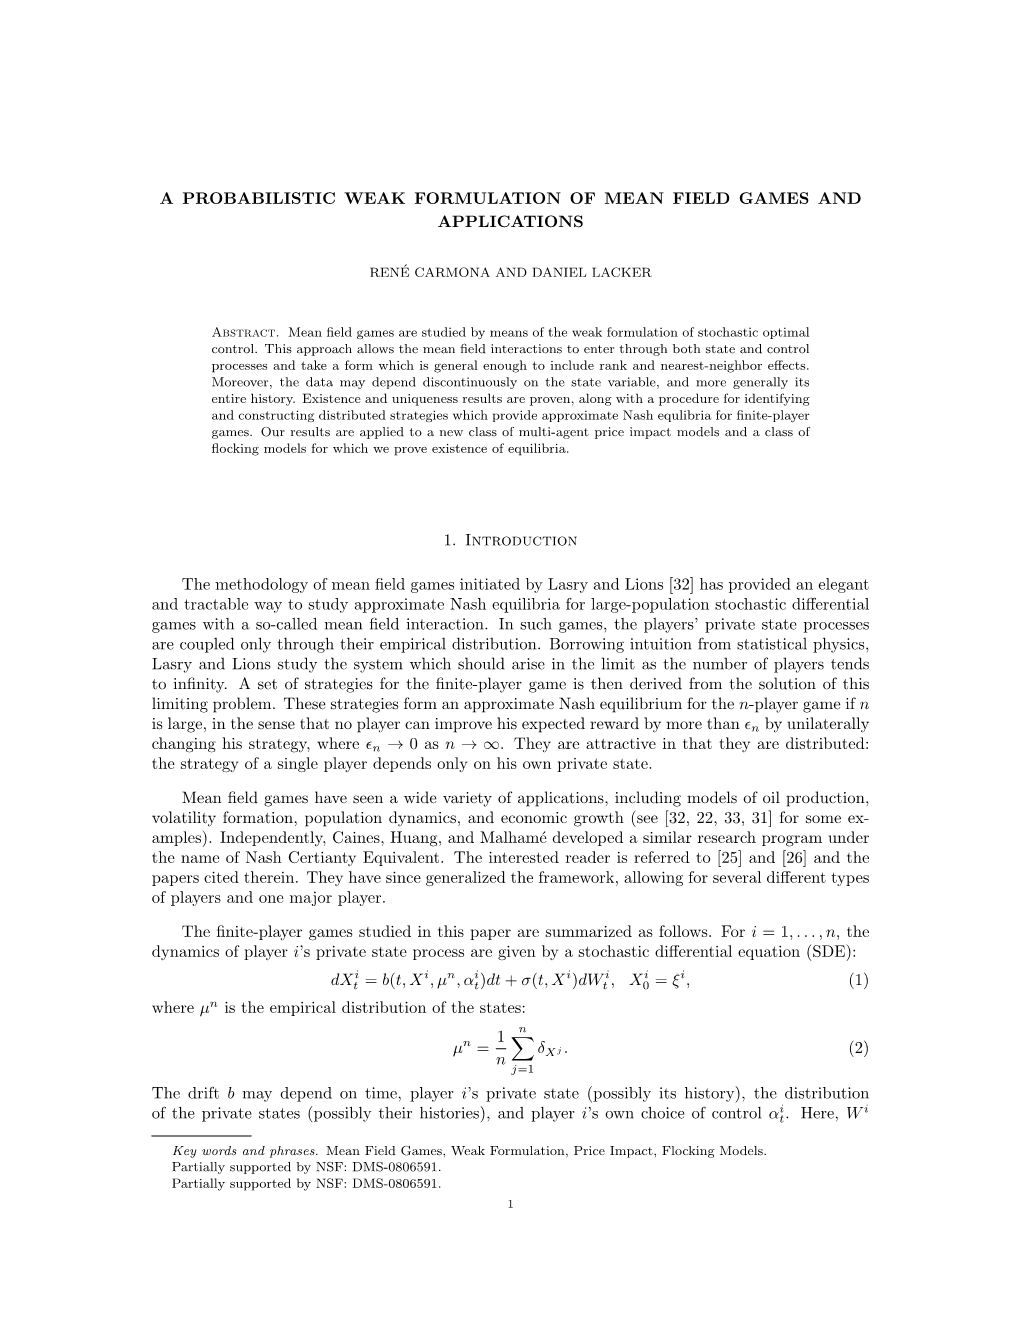 A Probabilistic Weak Formulation of Mean Field Games and Applications